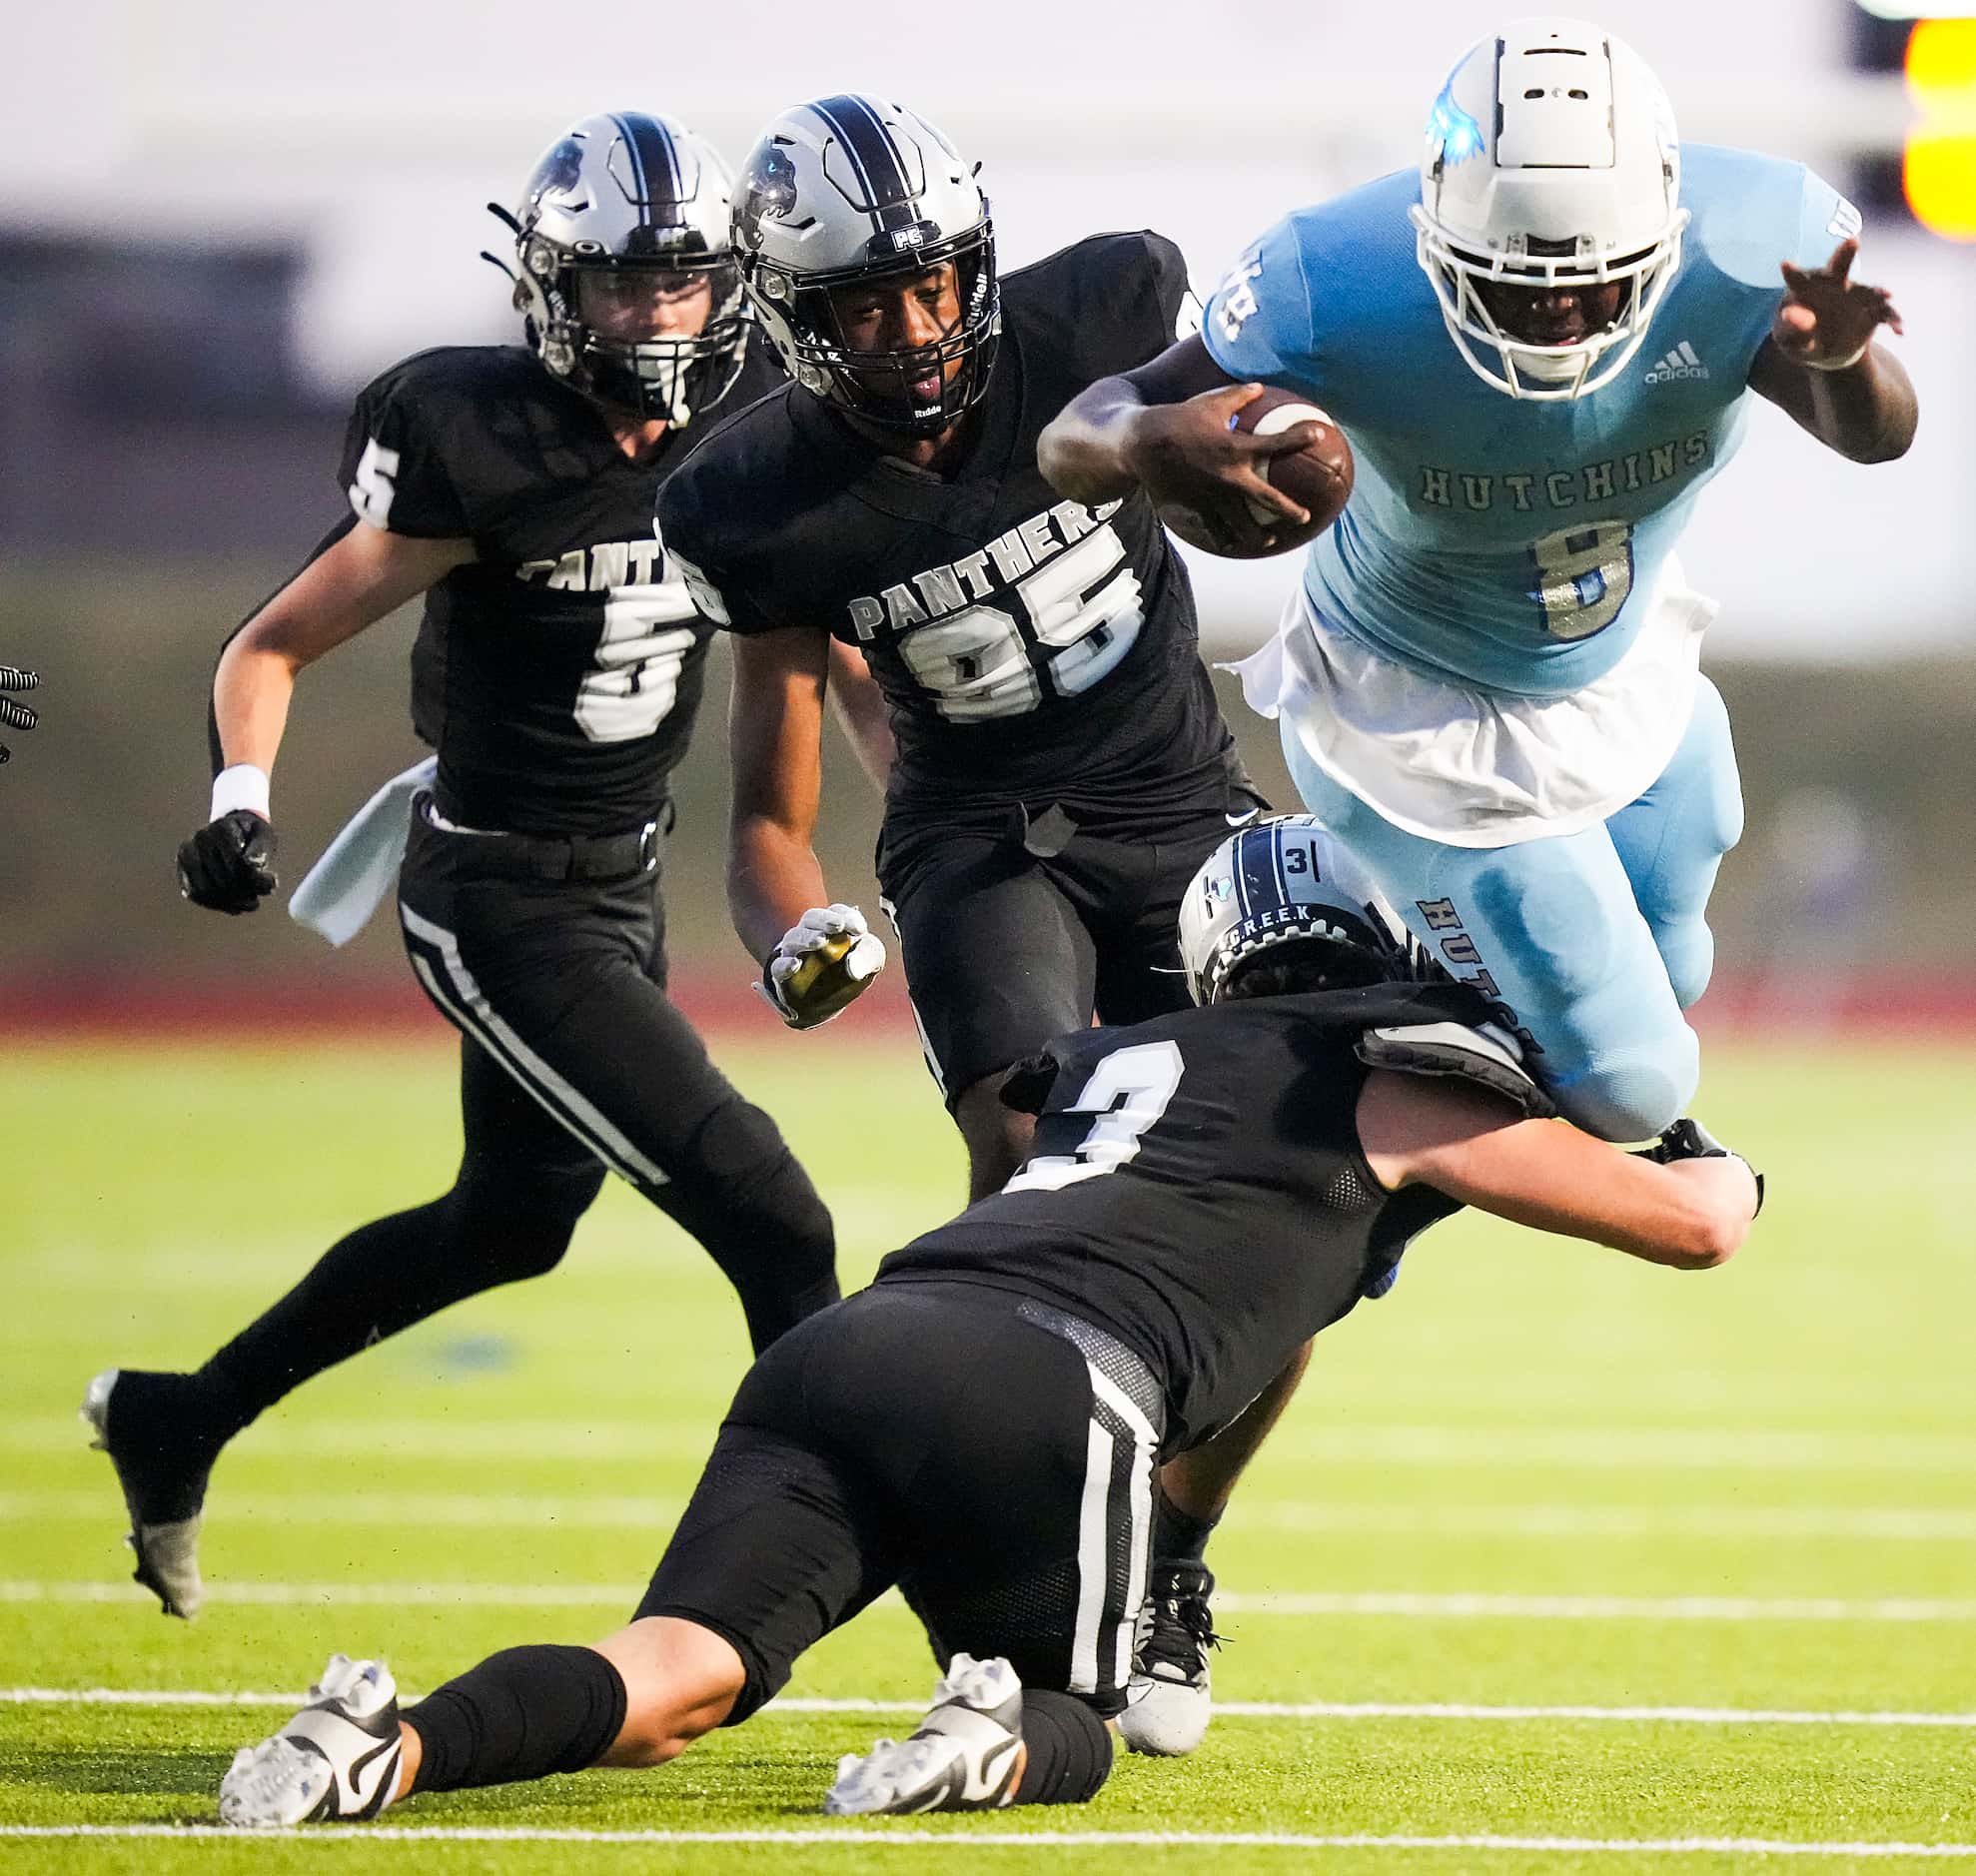 Wilmer-Hutchins running back Jacob Cummings (8) is brought down by Panther Creek’s Seth...